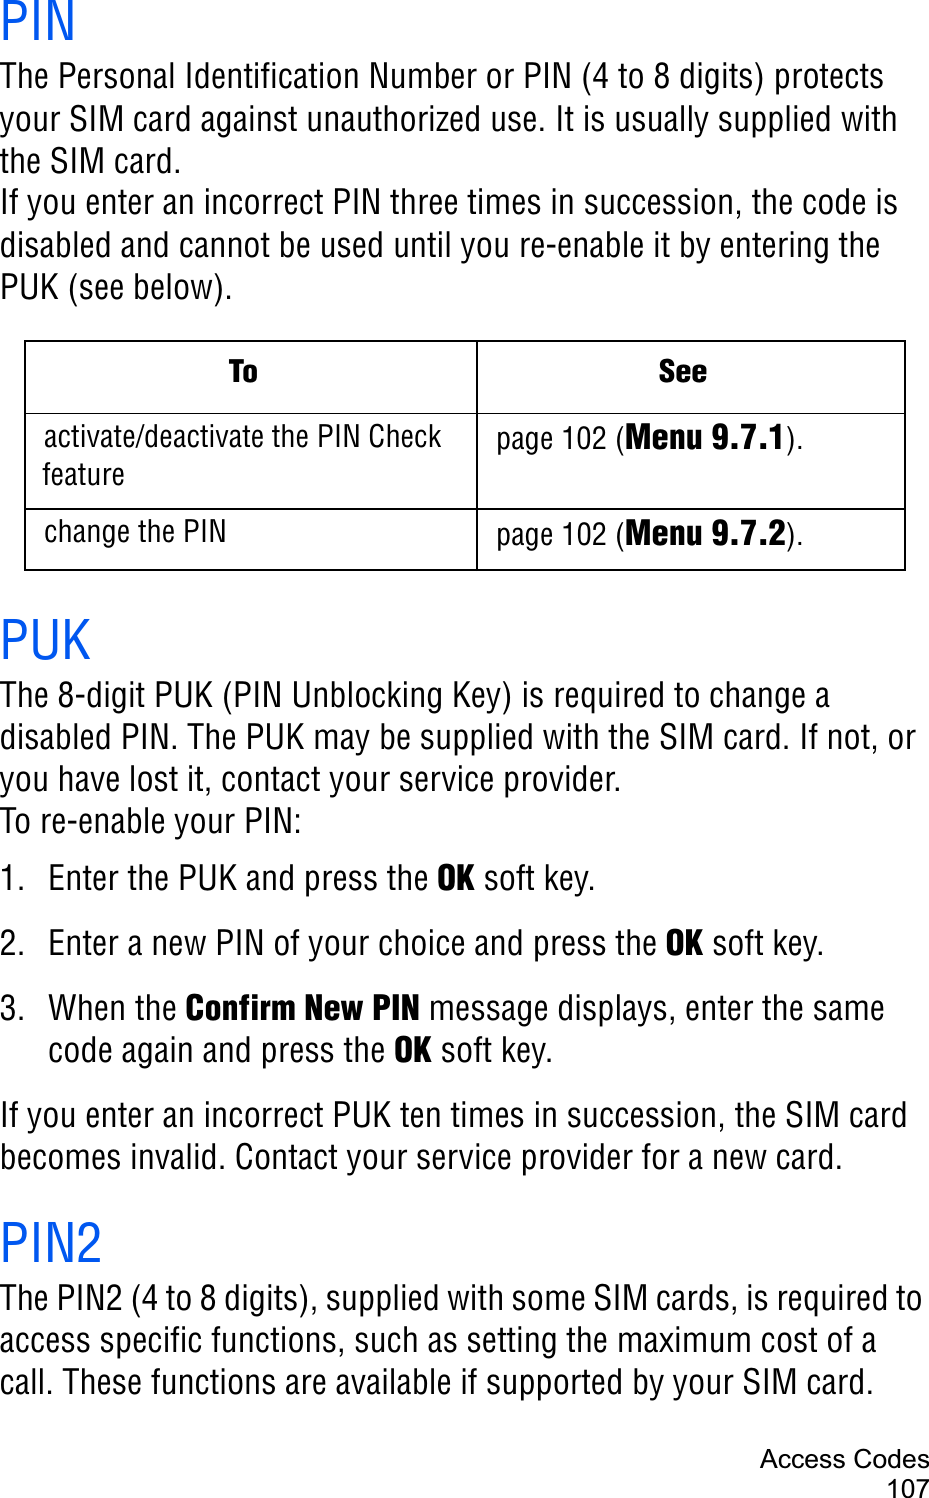 Access Codes107PINThe Personal Identification Number or PIN (4 to 8 digits) protects your SIM card against unauthorized use. It is usually supplied with the SIM card.If you enter an incorrect PIN three times in succession, the code is disabled and cannot be used until you re-enable it by entering the PUK (see below).PUKThe 8-digit PUK (PIN Unblocking Key) is required to change a disabled PIN. The PUK may be supplied with the SIM card. If not, or you have lost it, contact your service provider.To re-enable your PIN:1. Enter the PUK and press the OK soft key.2. Enter a new PIN of your choice and press the OK soft key.3. When the Confirm New PIN message displays, enter the same code again and press the OK soft key.If you enter an incorrect PUK ten times in succession, the SIM card becomes invalid. Contact your service provider for a new card.PIN2The PIN2 (4 to 8 digits), supplied with some SIM cards, is required to access specific functions, such as setting the maximum cost of a call. These functions are available if supported by your SIM card.To Seeactivate/deactivate the PIN Check featurepage 102 (Menu 9.7.1).change the PIN page 102 (Menu 9.7.2).